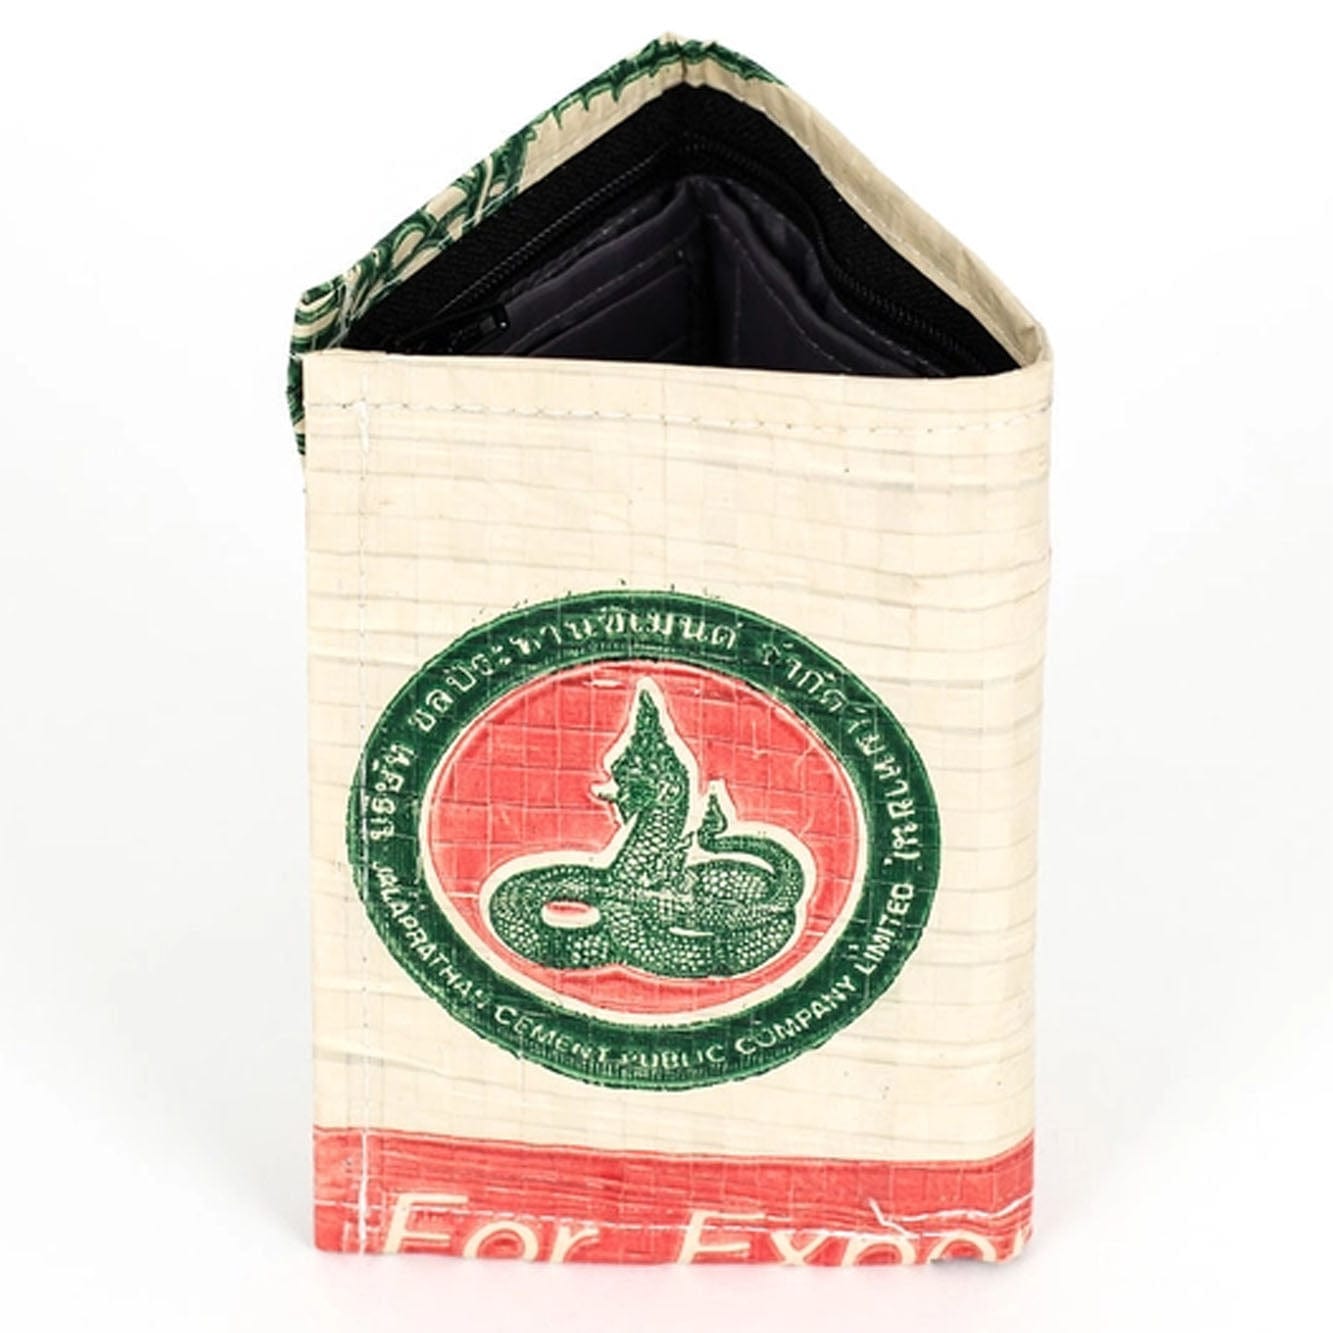 Animal Feed/Cement Bag Trifold Wallet